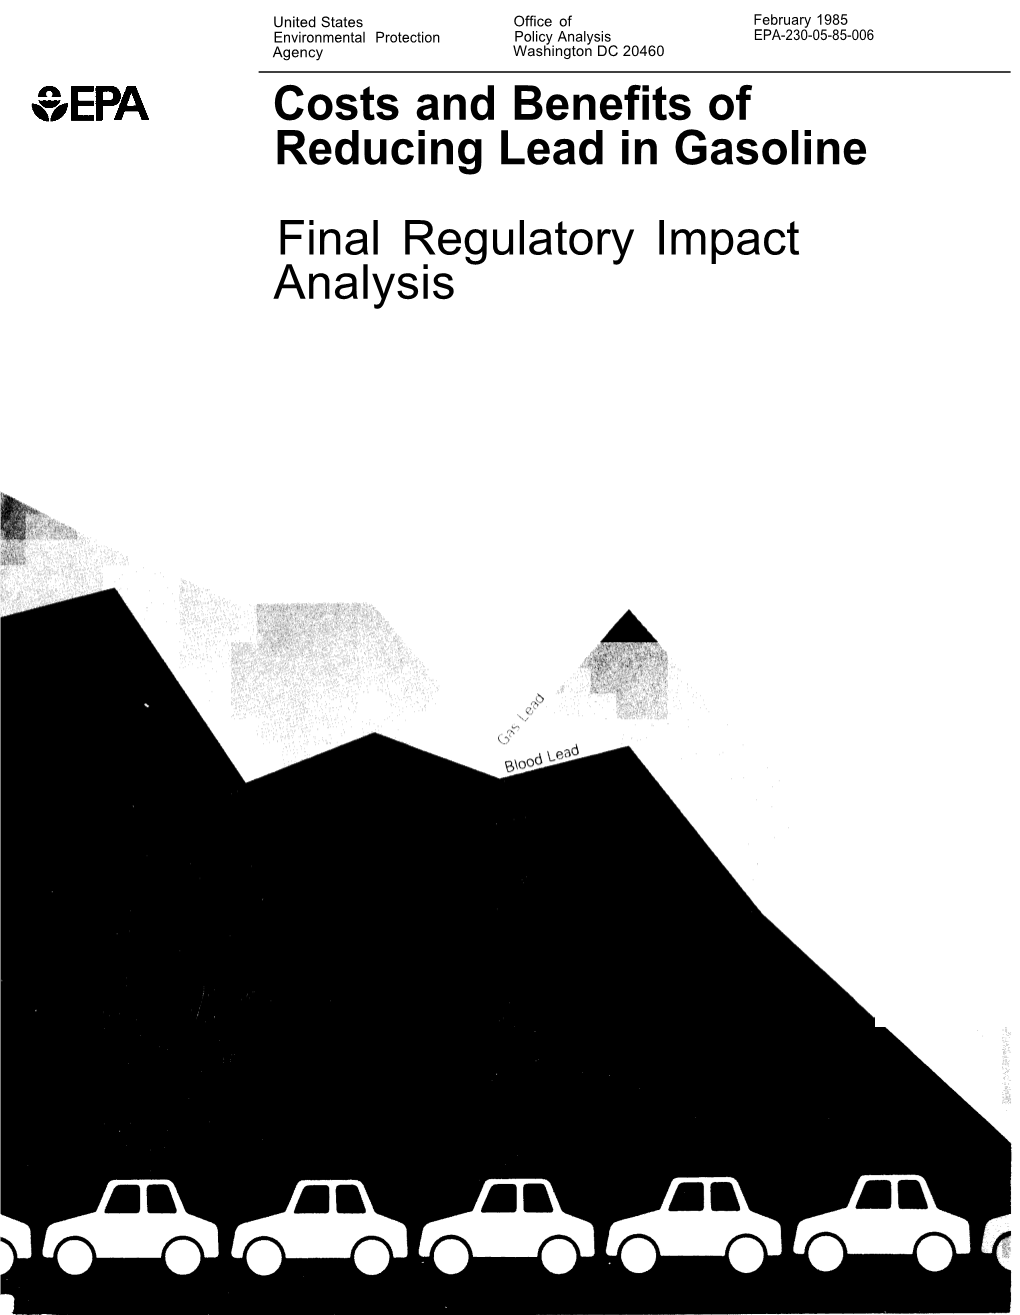 Costs and Benefits of Reducing Lead in Gasoline Final Regulatory Impact Analysis COSTS and BENEFITS of REDUCING LEAD in GASOLINE